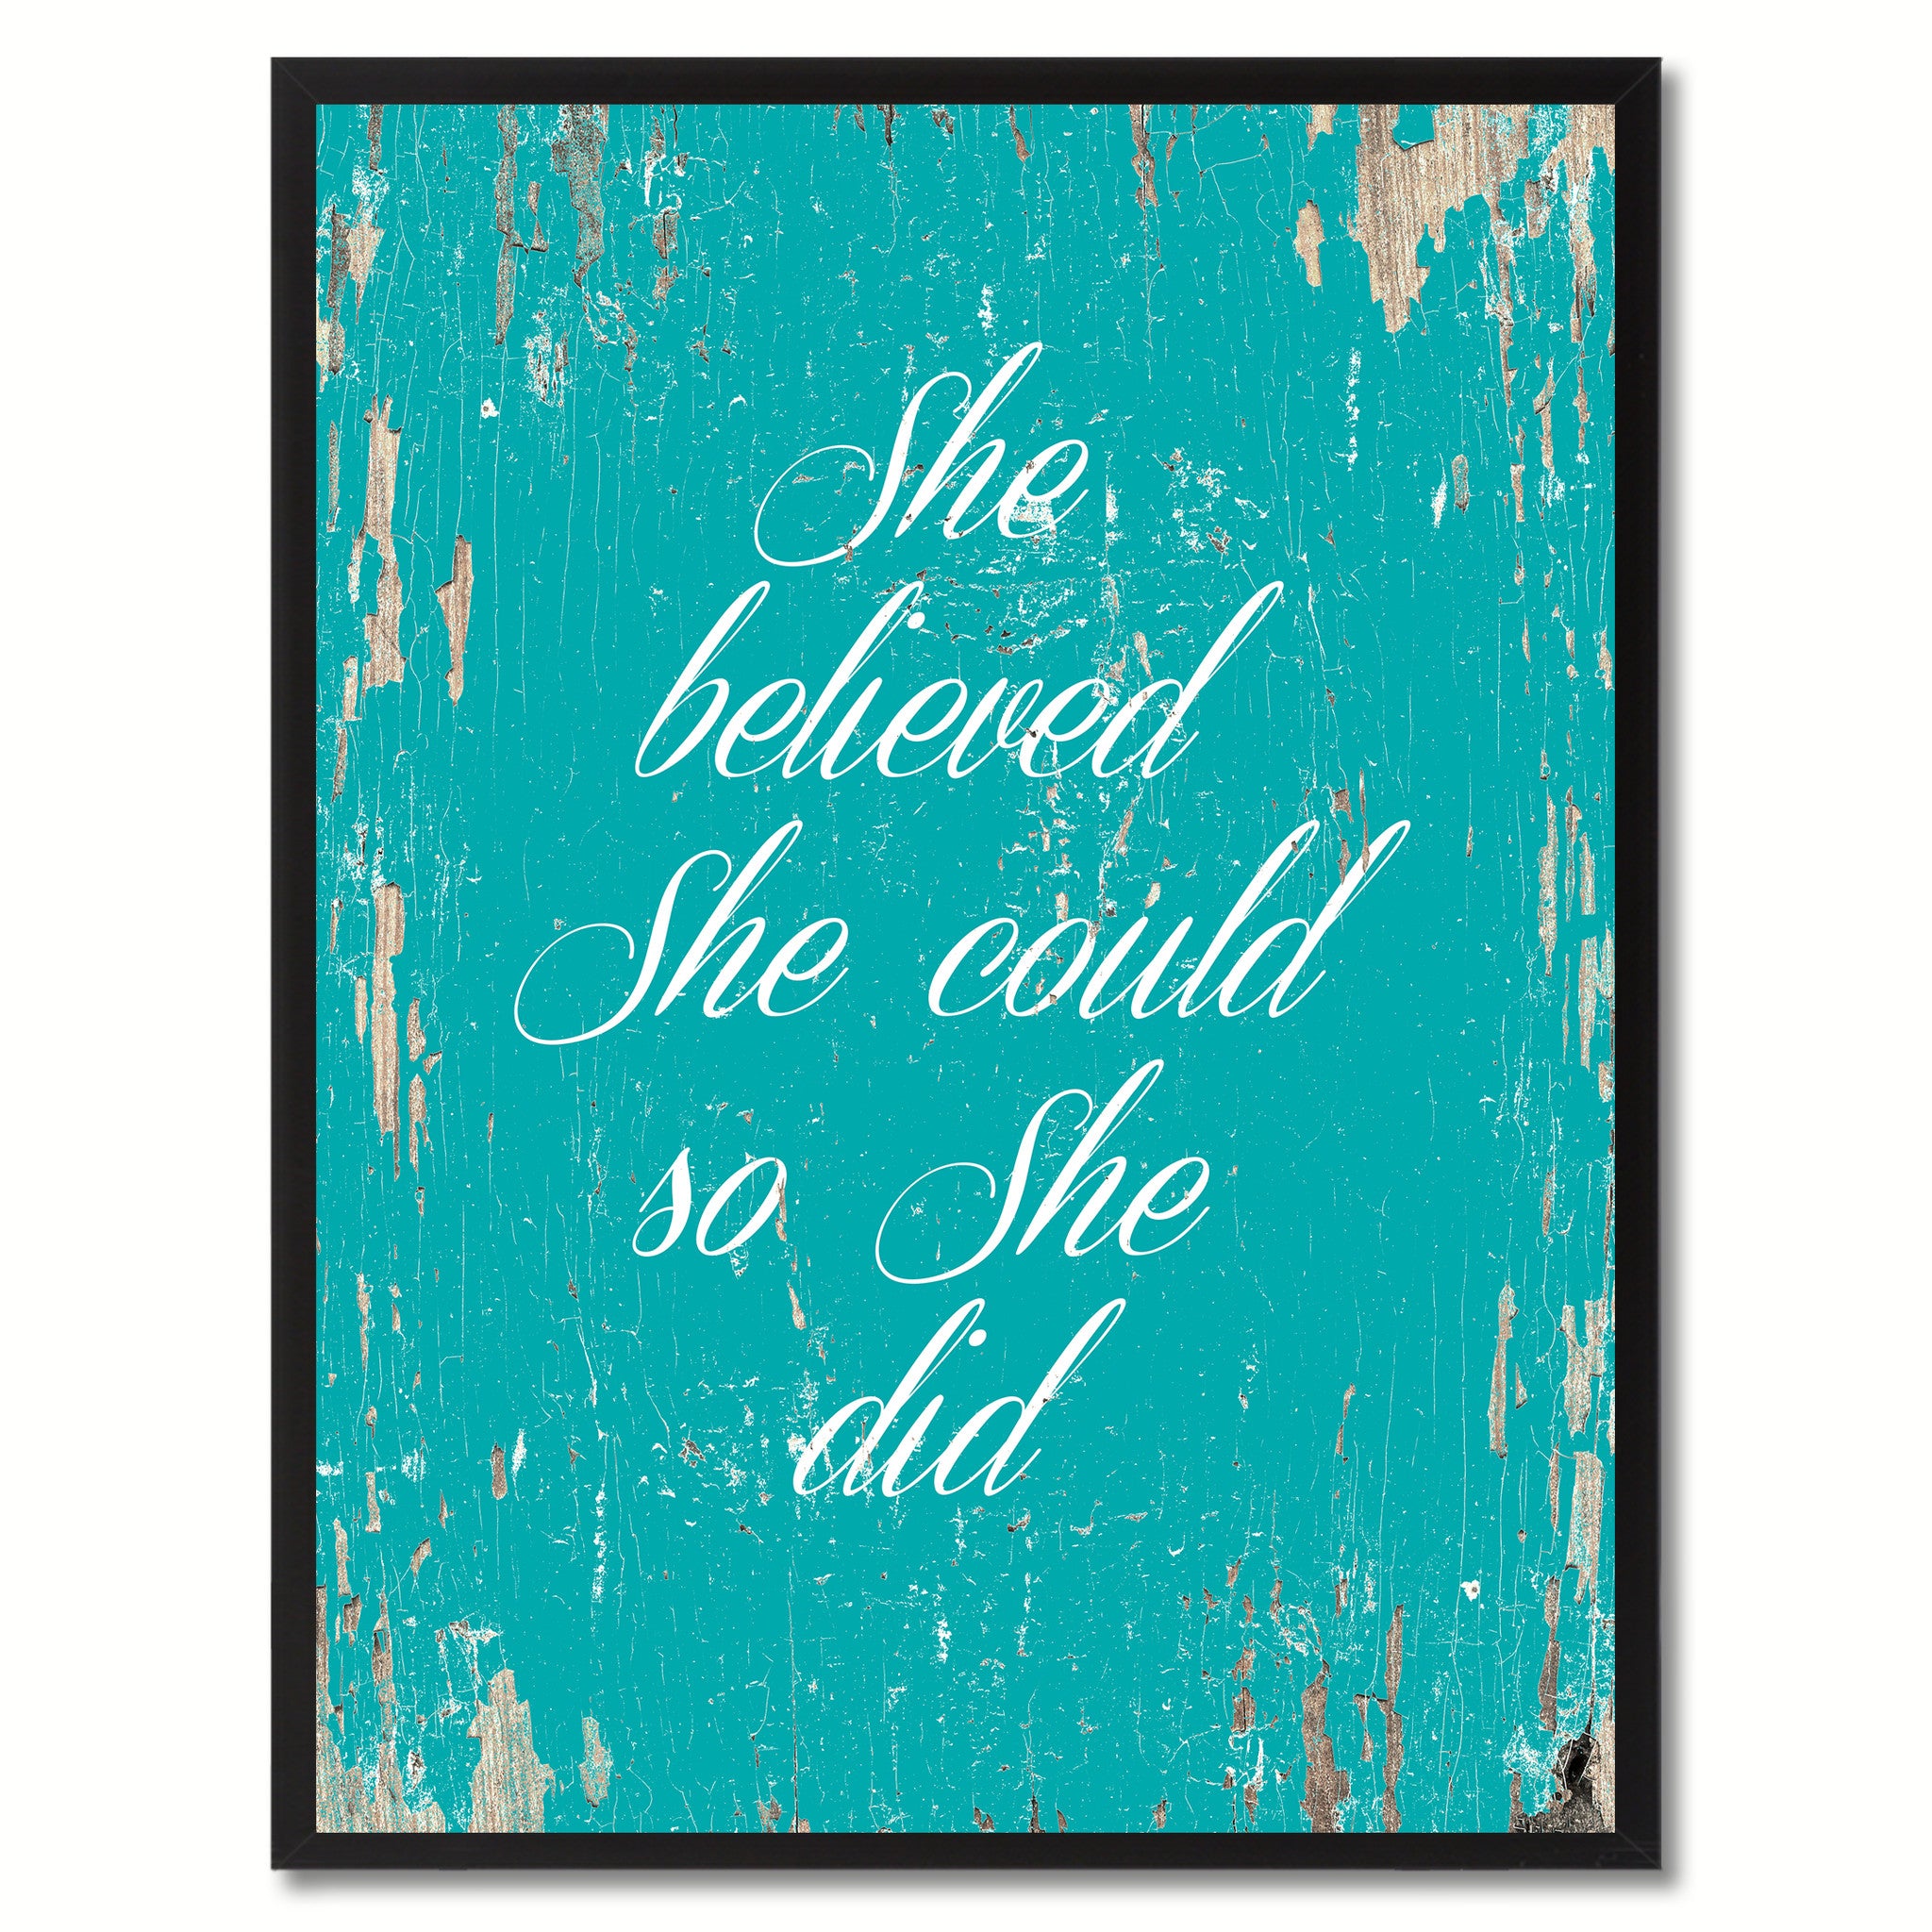 She Believed She Could So She Did Saying Canvas Print, Black Picture Frame Home Decor Wall Art Gifts